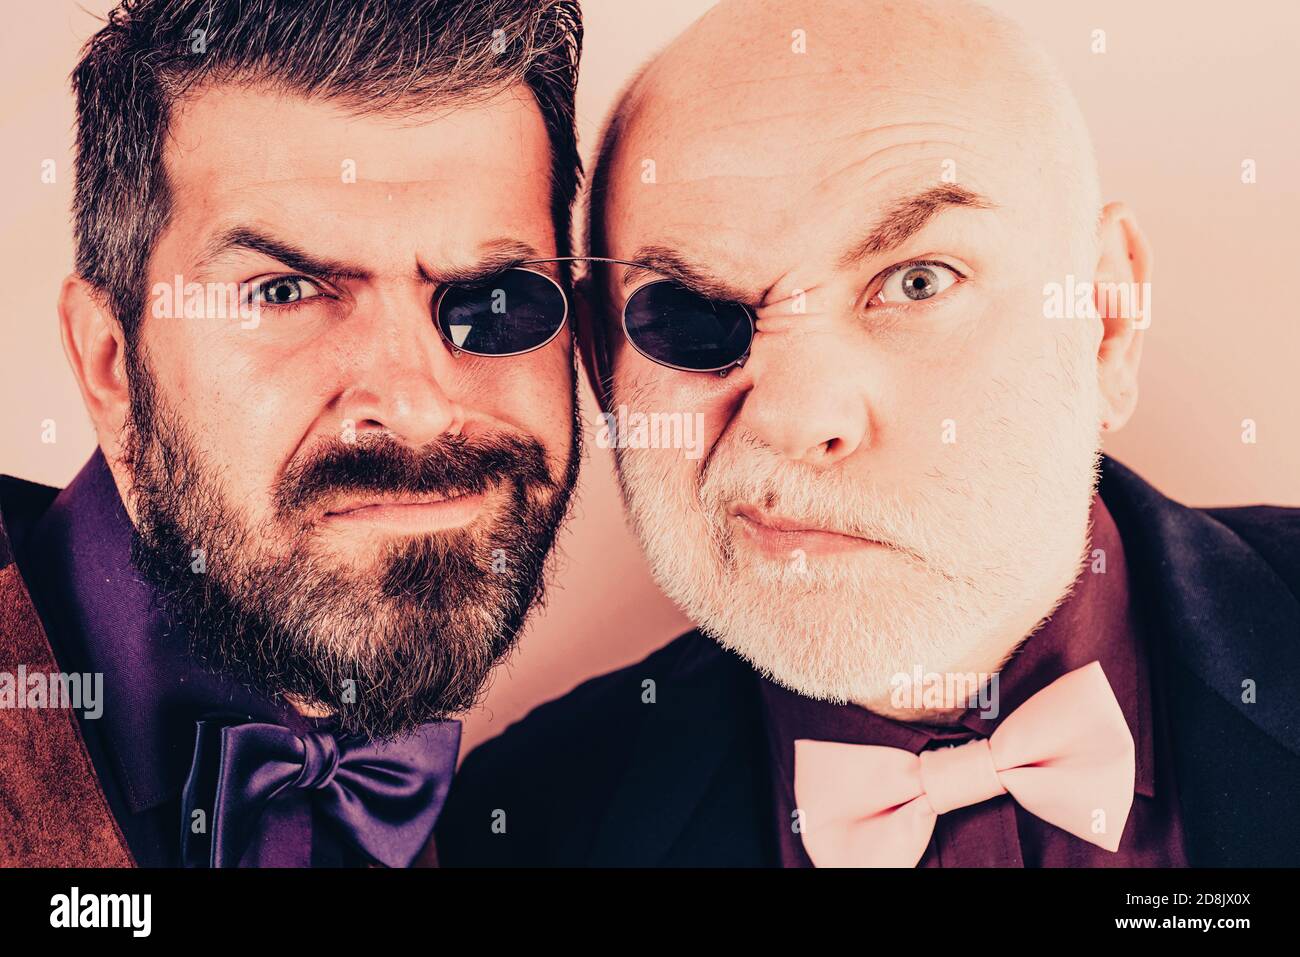 Old father and son. Fathers day. Crazy emotions. Comical dad and son. Funny expression people. Daddy comic. Happiness together. Stock Photo